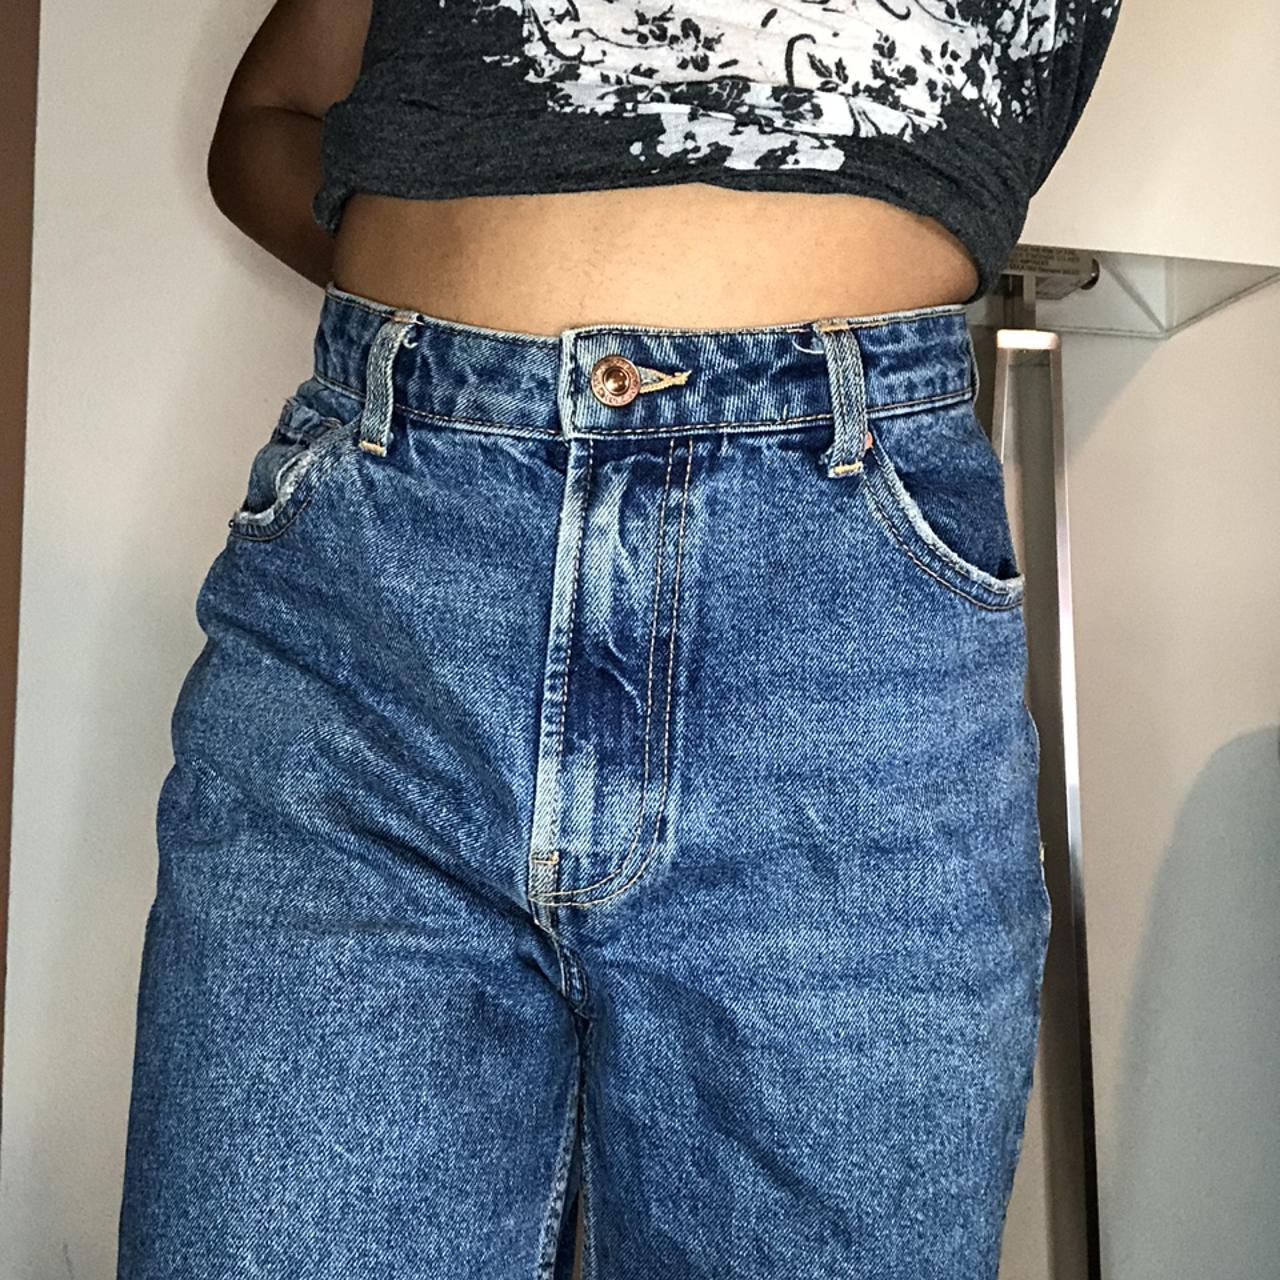 My All Time Favorite Denim - A Mix of Min